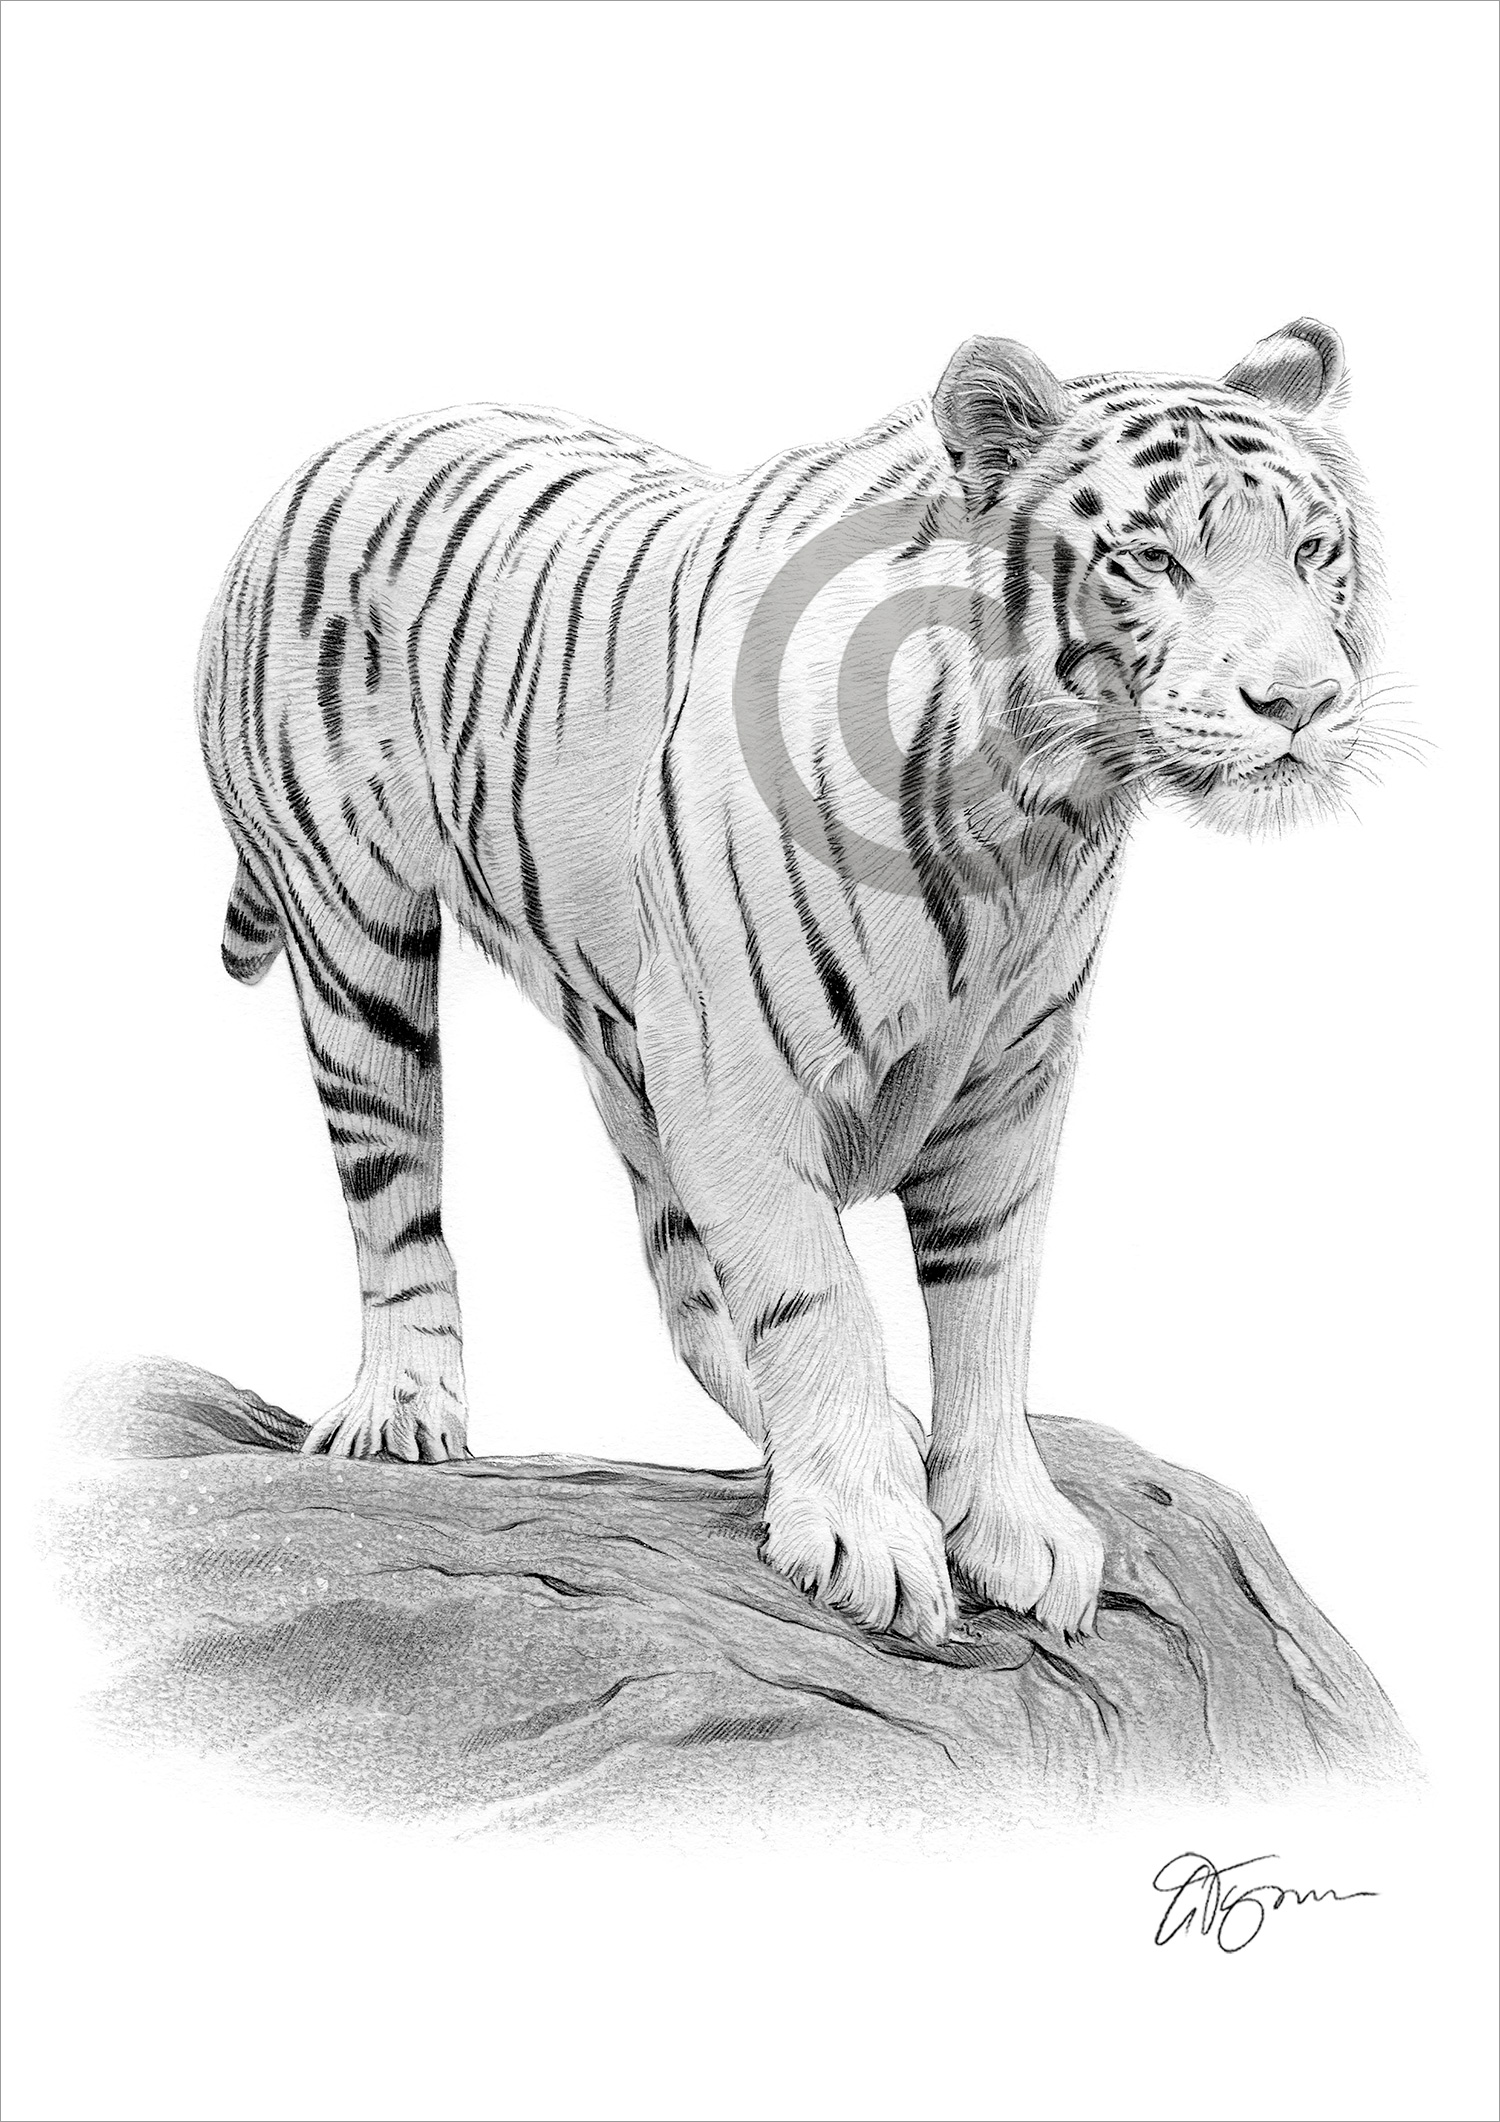 Pencil drawing of an adult white Bengal tiger by artist Gary Tymon